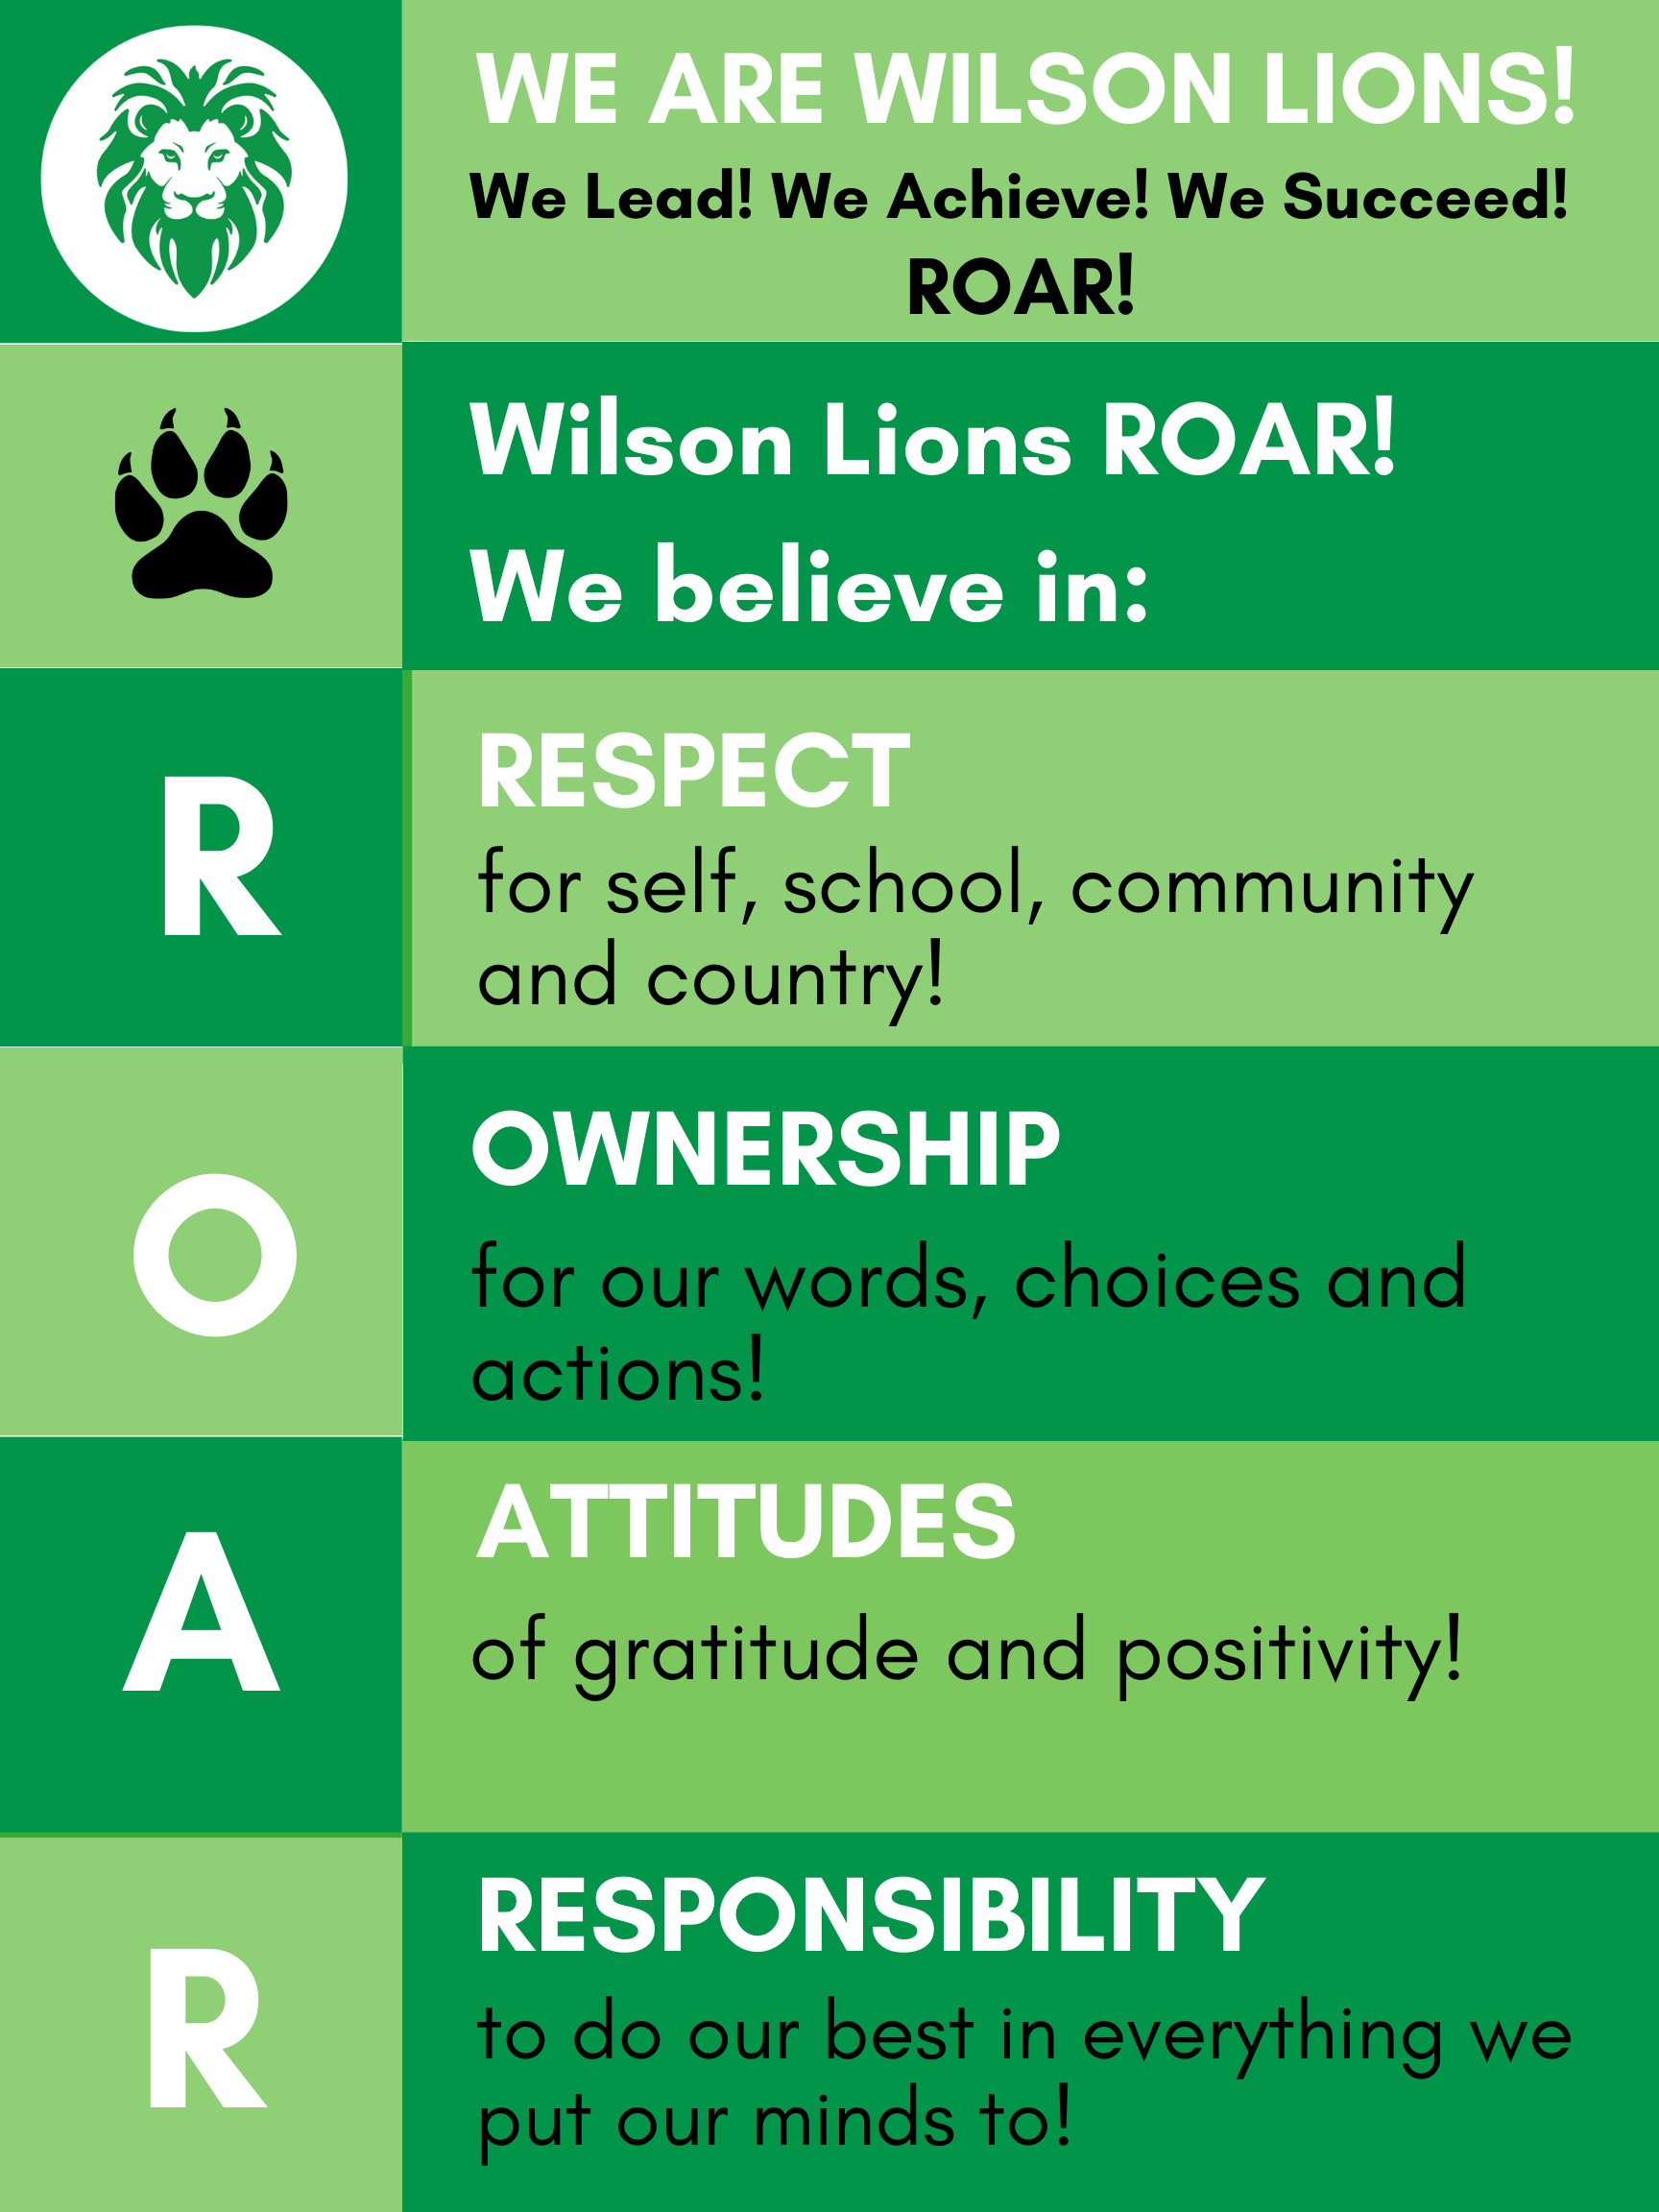 We are Wilson Lions! We Lead! We Achieve! We succeed! ROAR! Respect, Ownership, Attitudes, Responsibility.